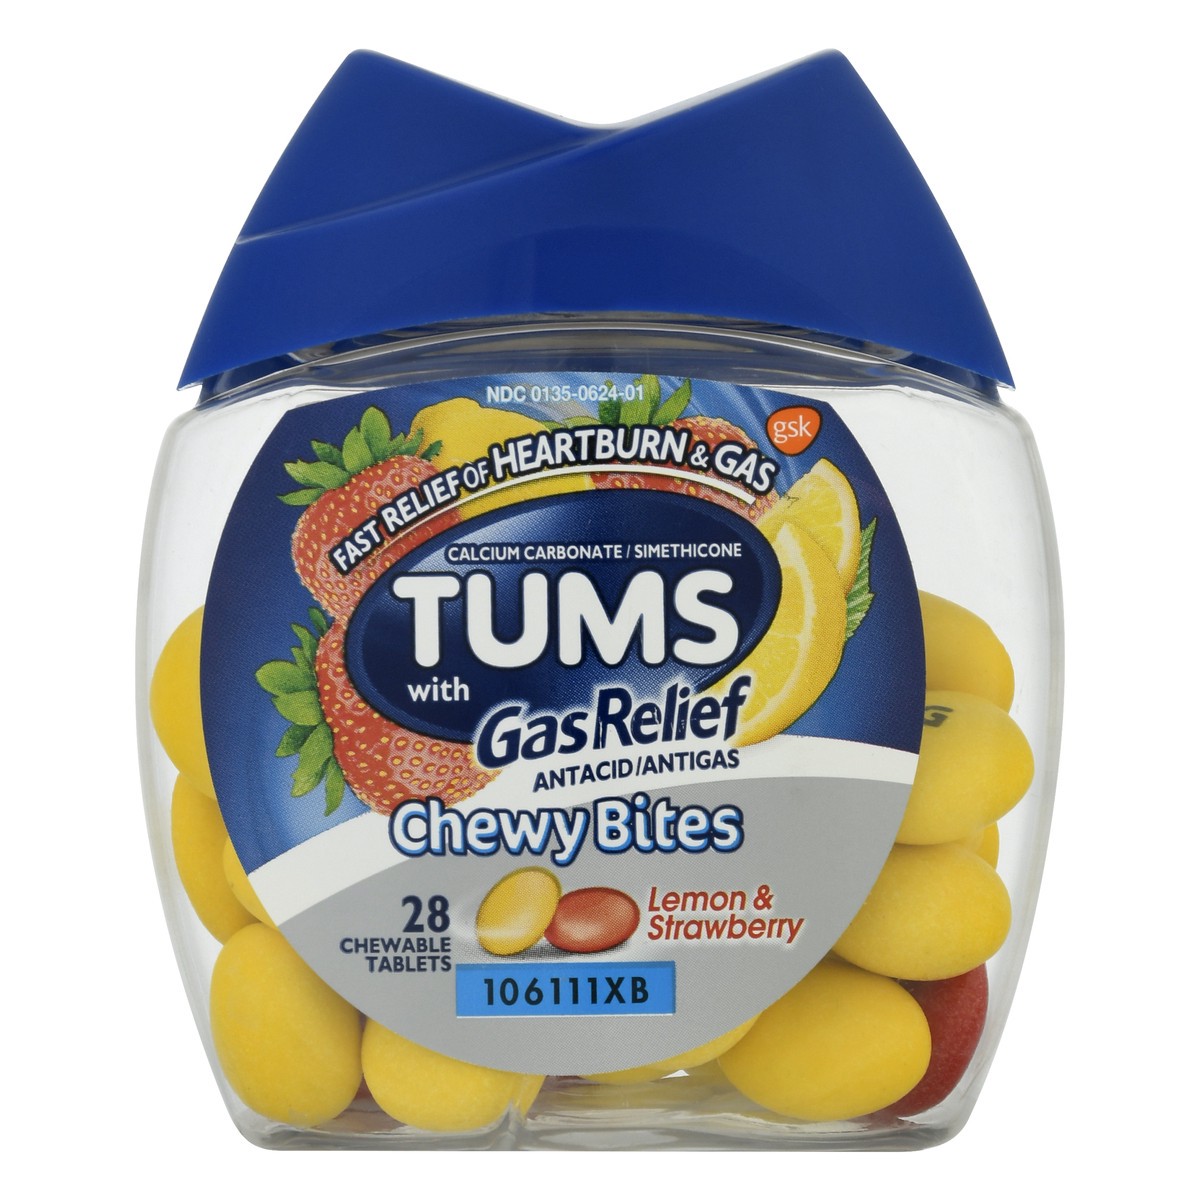 slide 1 of 9, Tums Chewable Tablets Lemon & Strawberry Gas Relief 28.0 ea, 28 ct